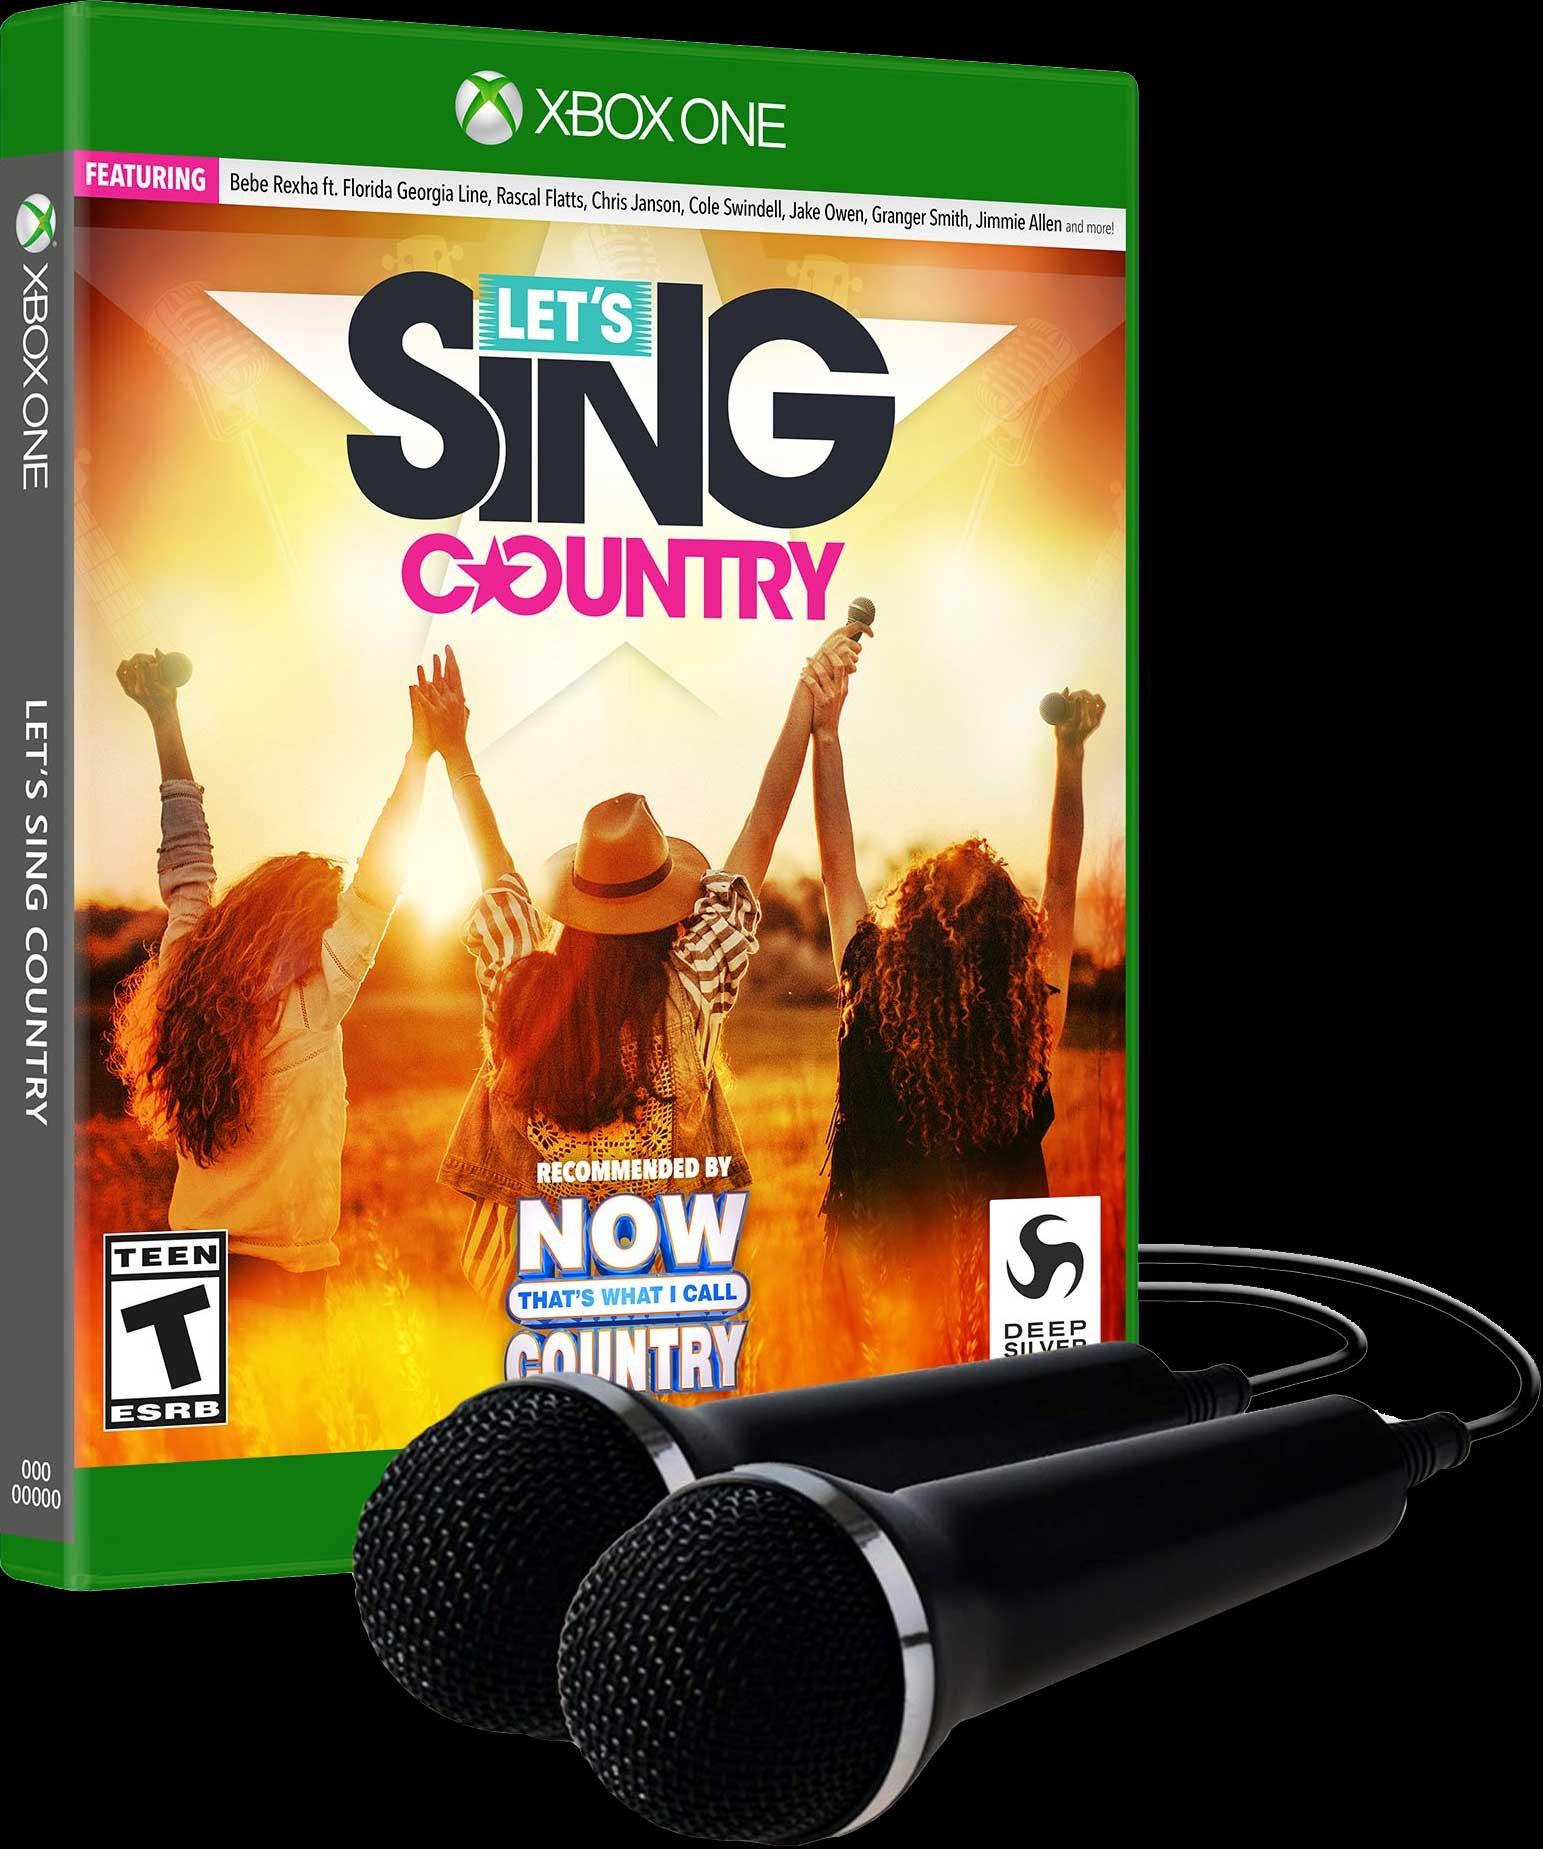 mic that comes with xbox one